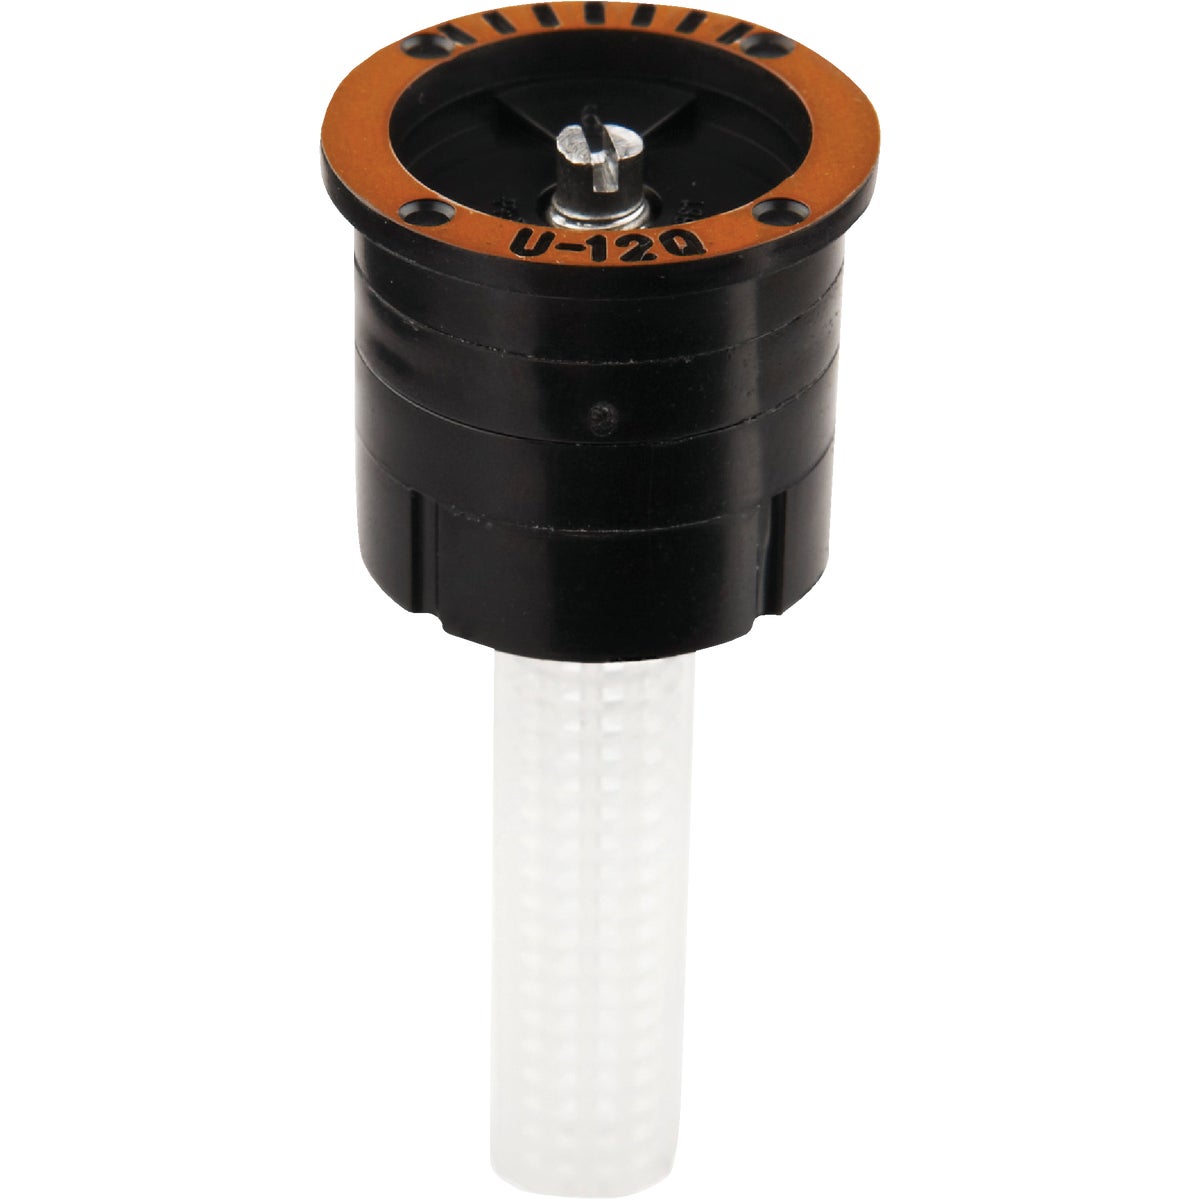 Item 719940, Dual Spray 1200 series sprinklers feature the 3 most commonly used nozzle 